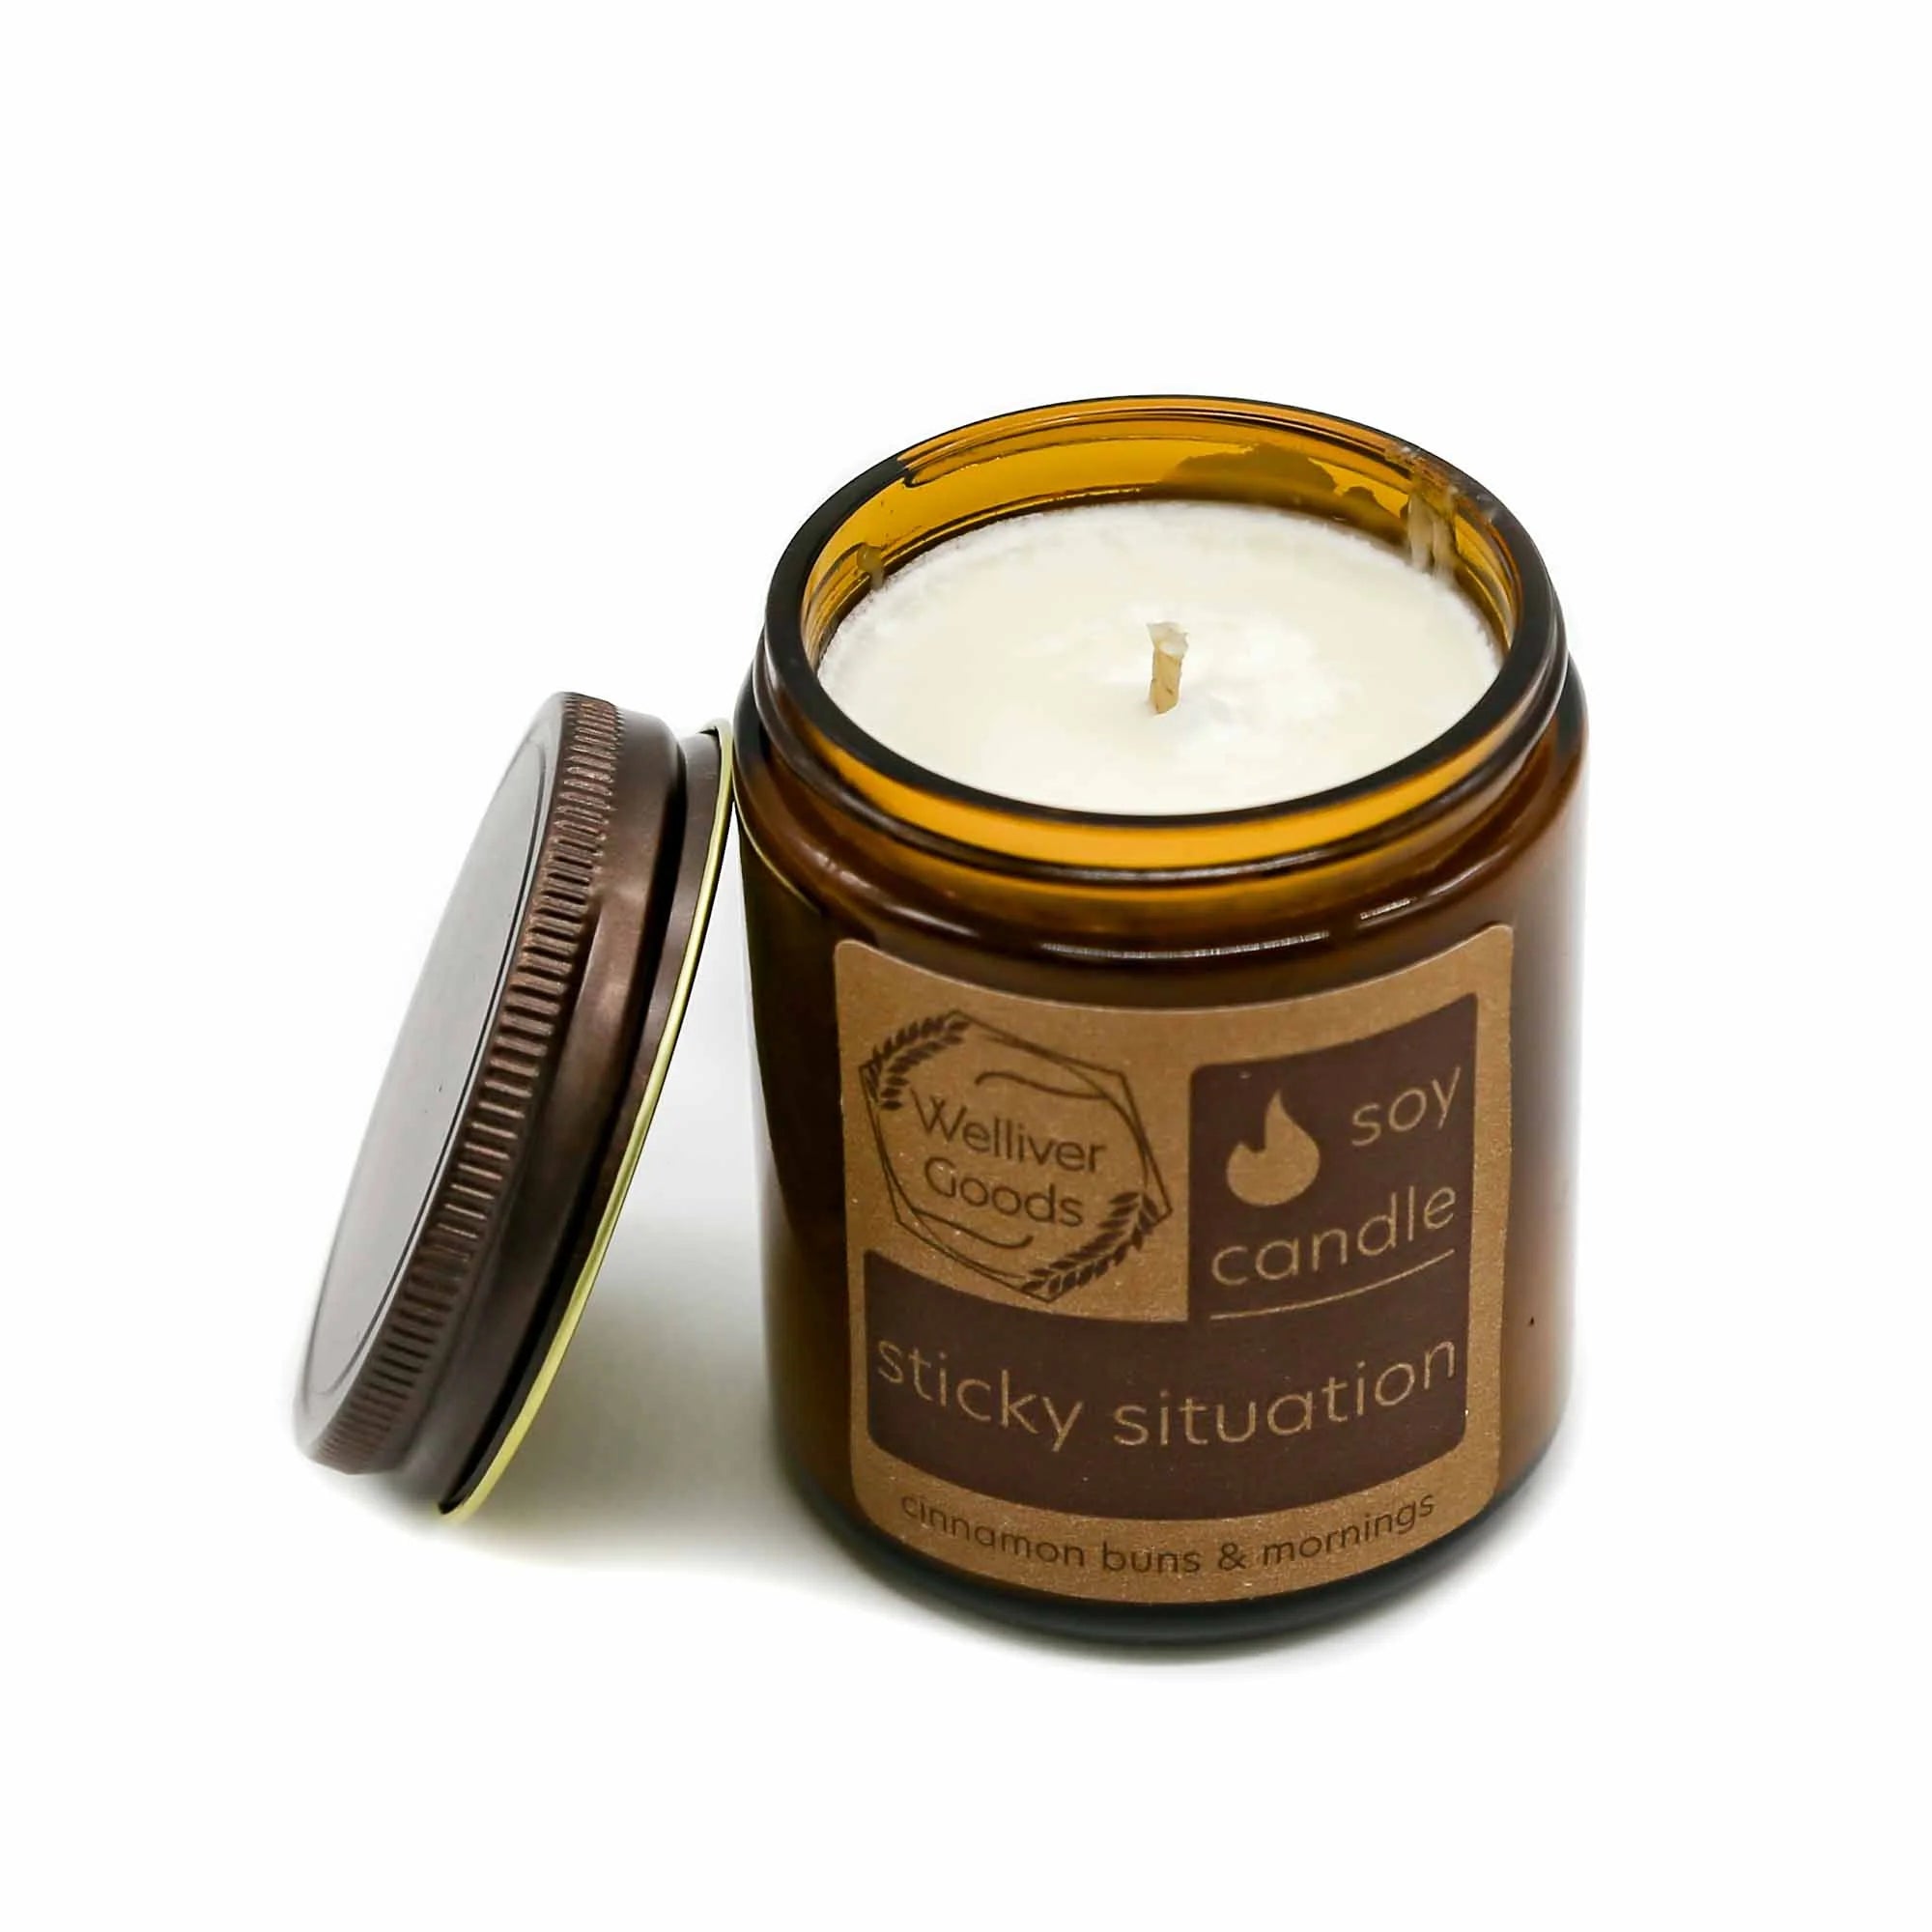 welliver goods candle - sticky situation - Mortise And Tenon